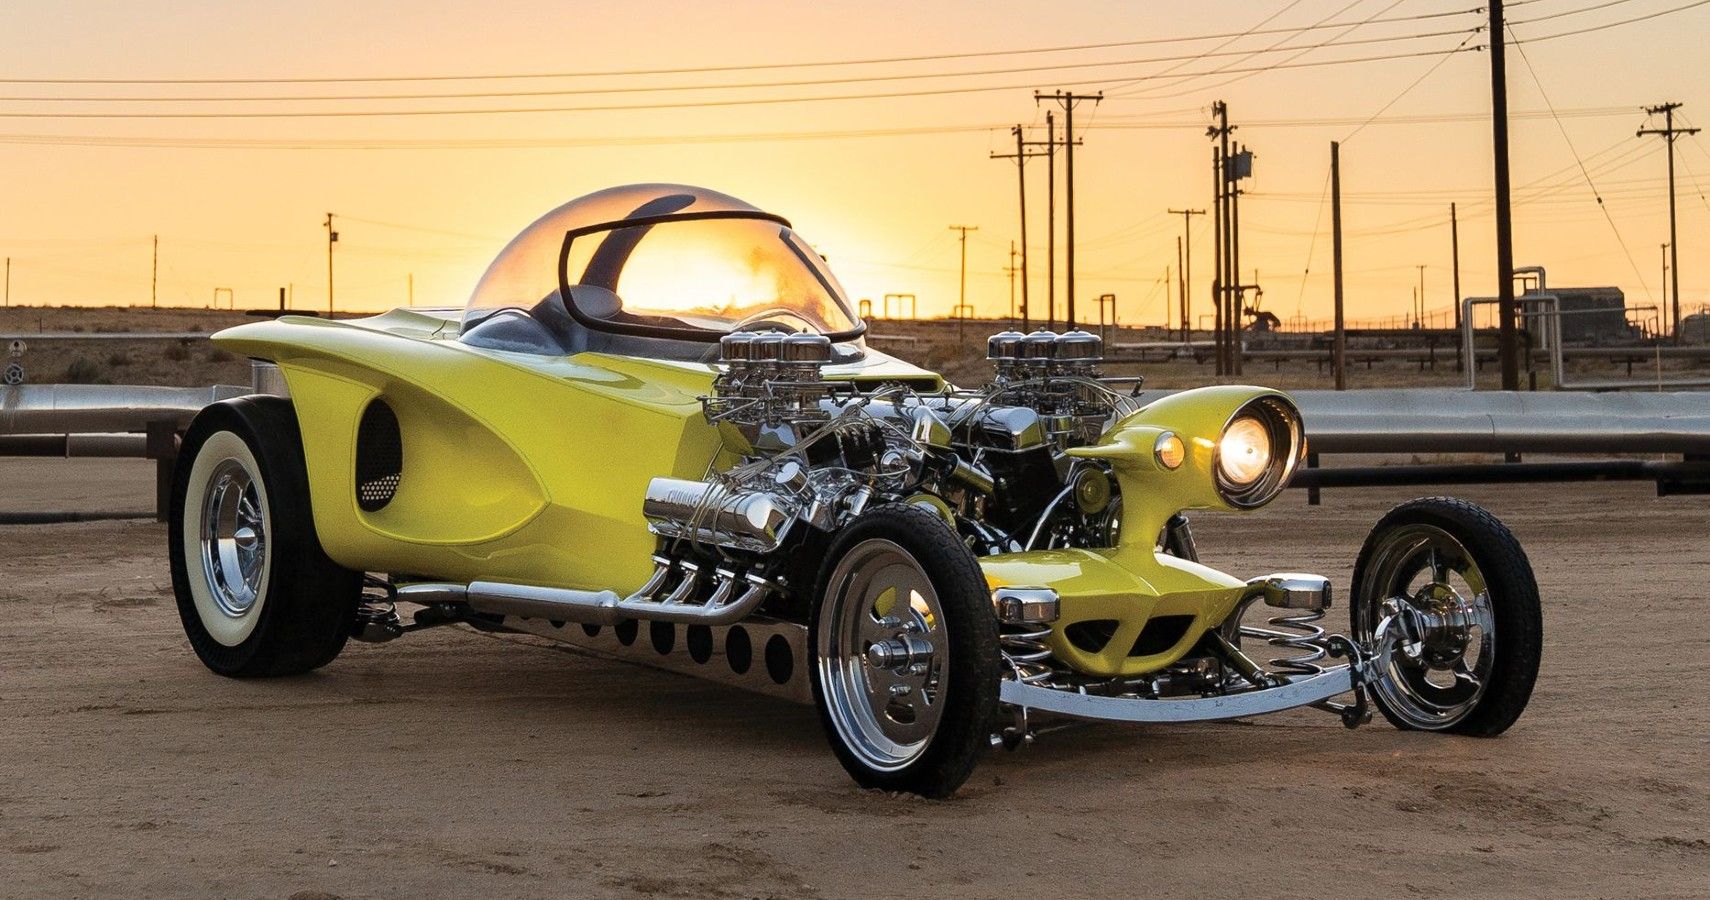 A Detailed Look At Ed Roth's Mysterion